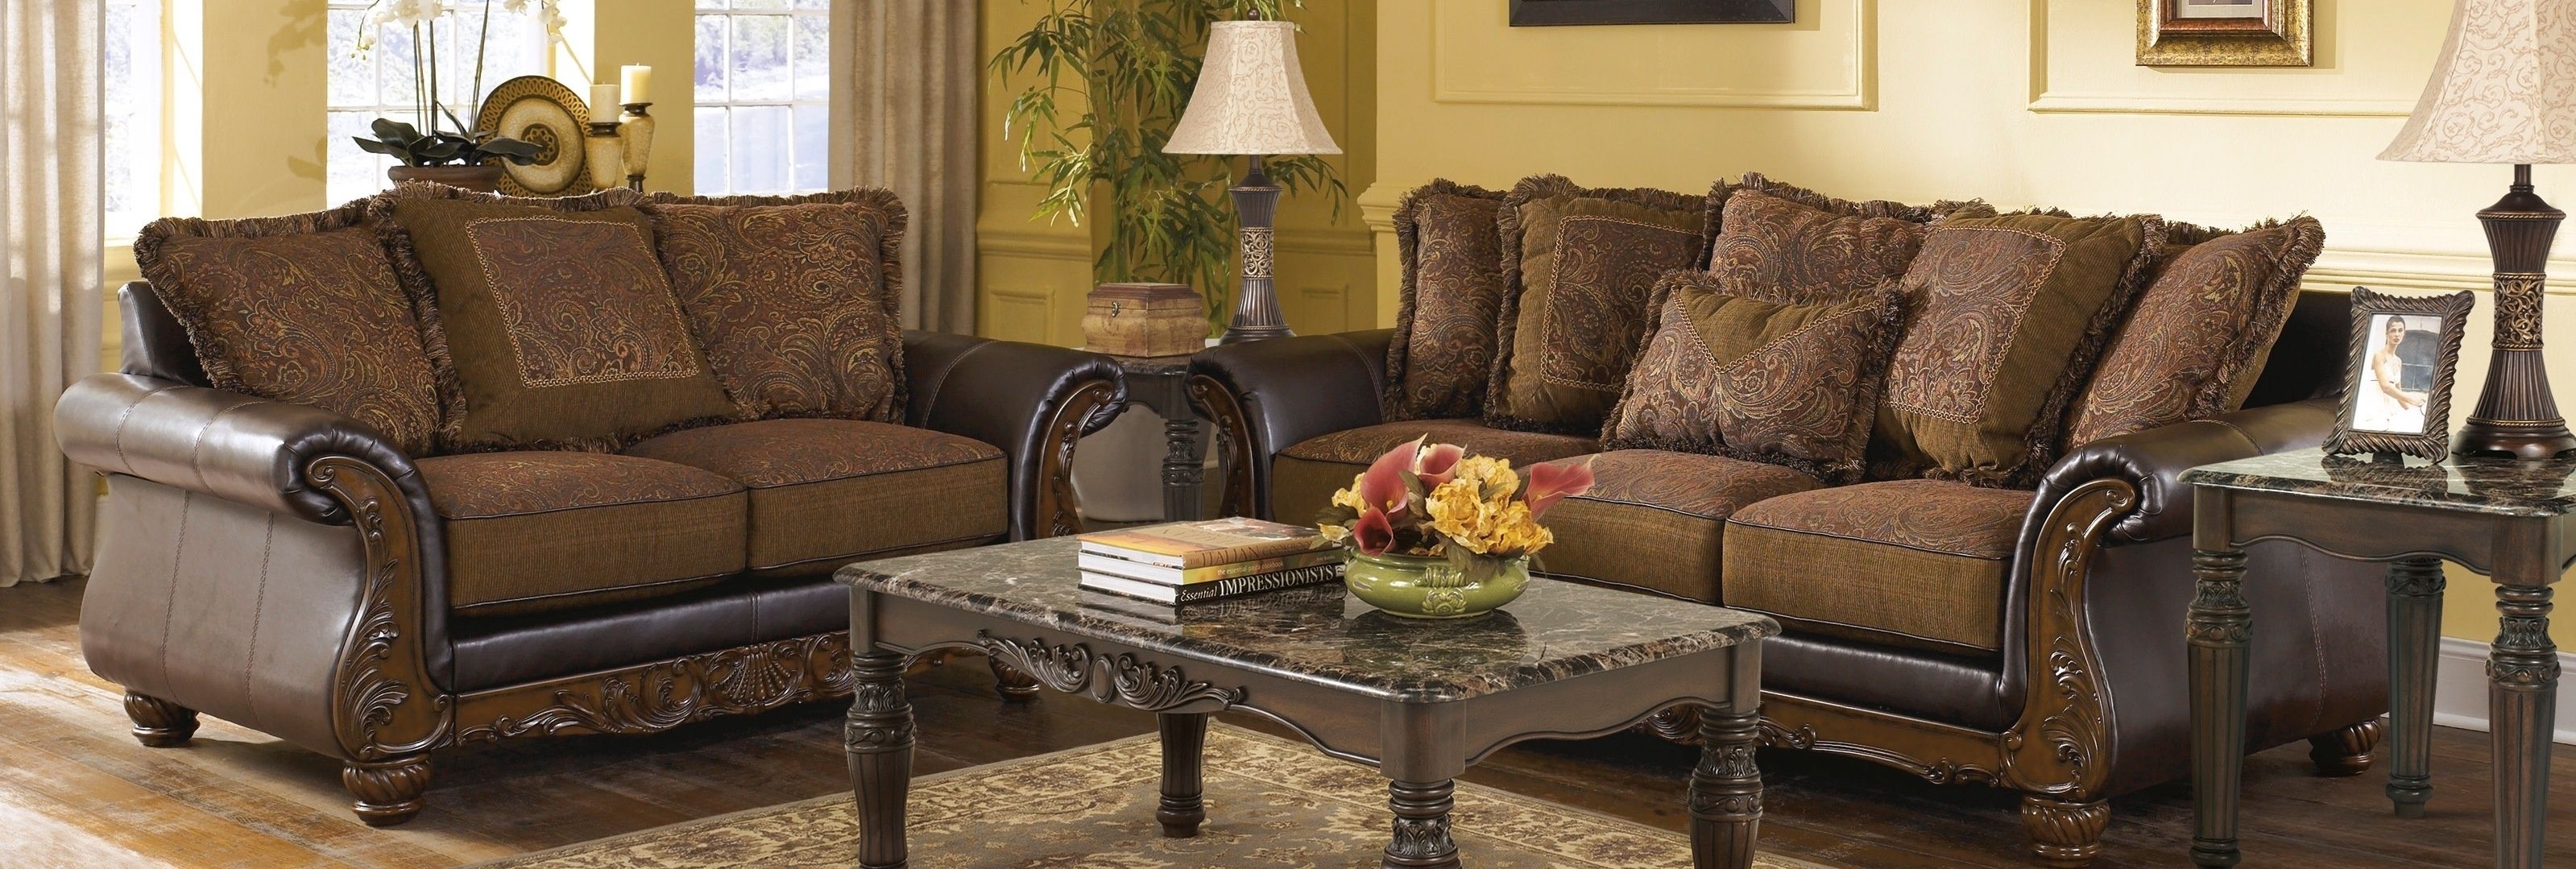 Aarons Living Room Furniture | Fireplace Living Pertaining To Sectional Sofas At Aarons (View 7 of 10)